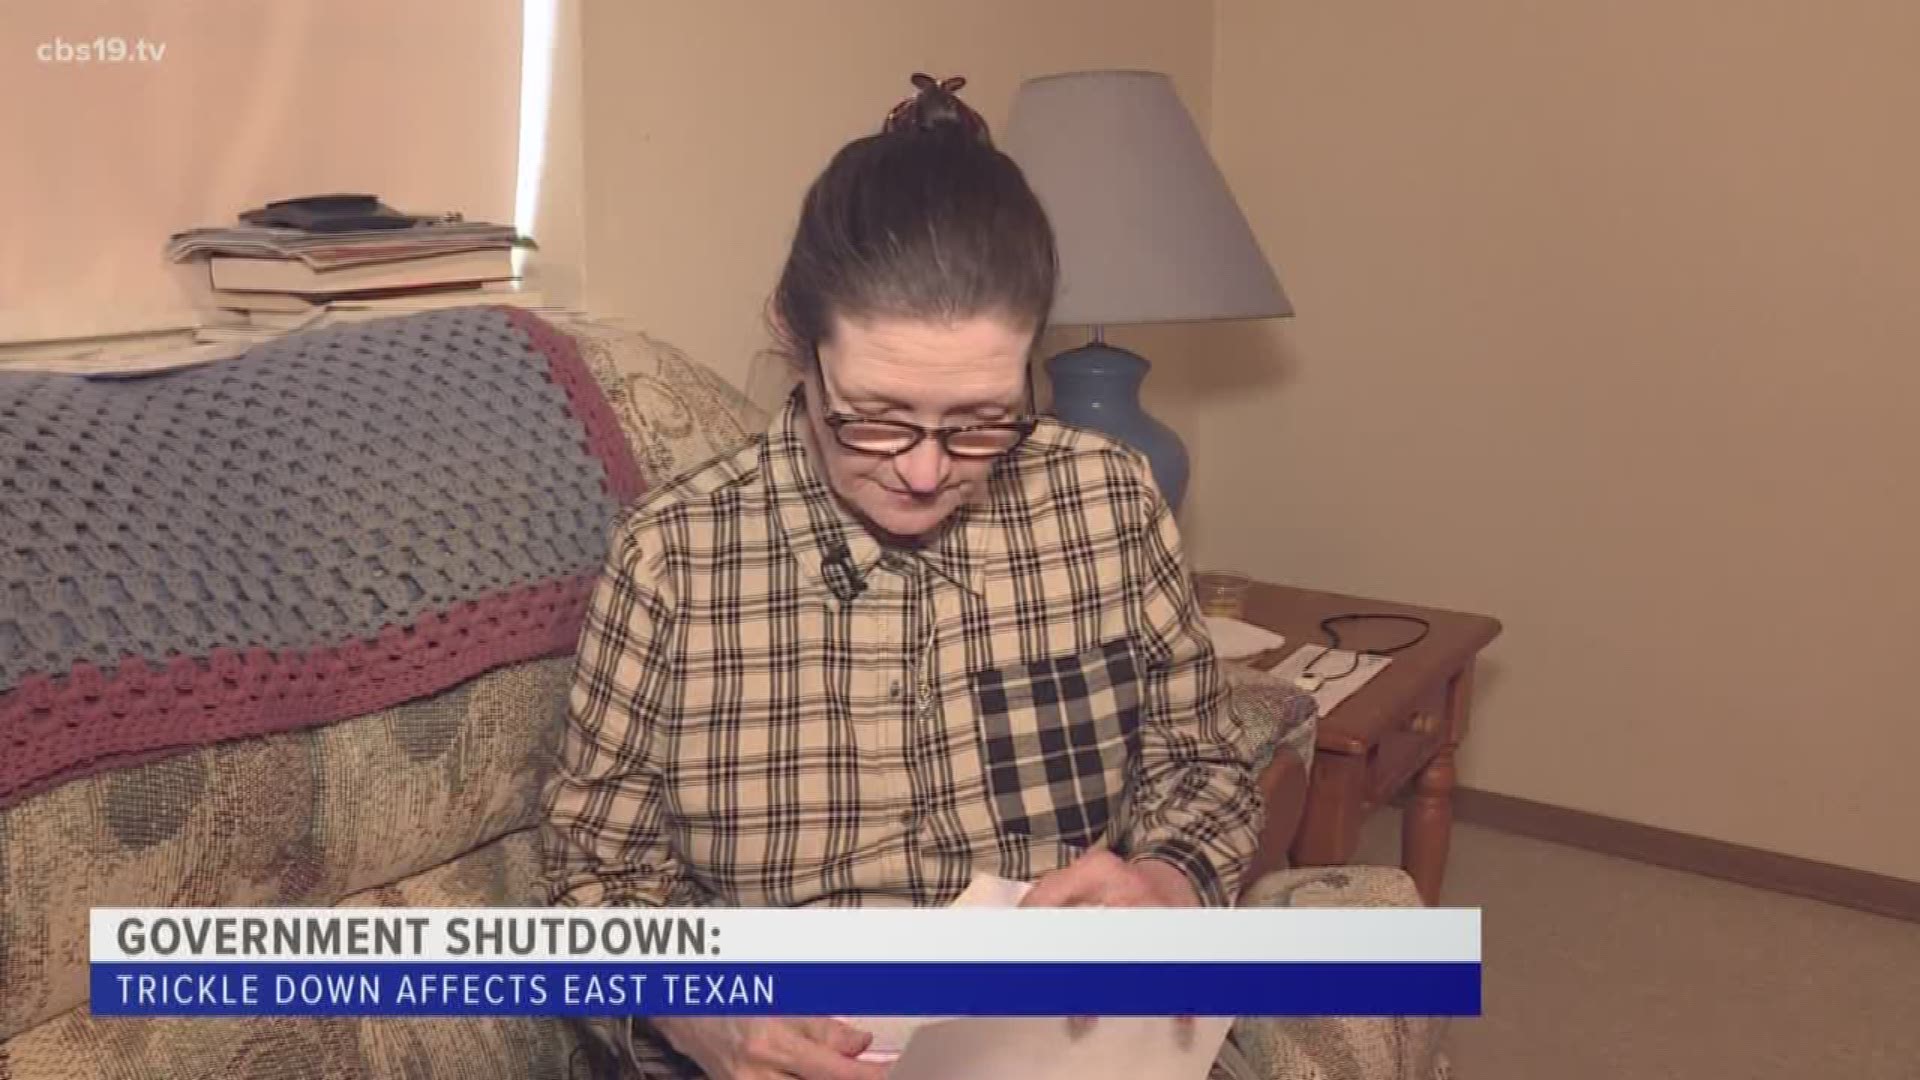 An East Texas woman is in need of the U.S. Department of Housing and Urban Development's help, but because of the government shutdown she is in limbo.